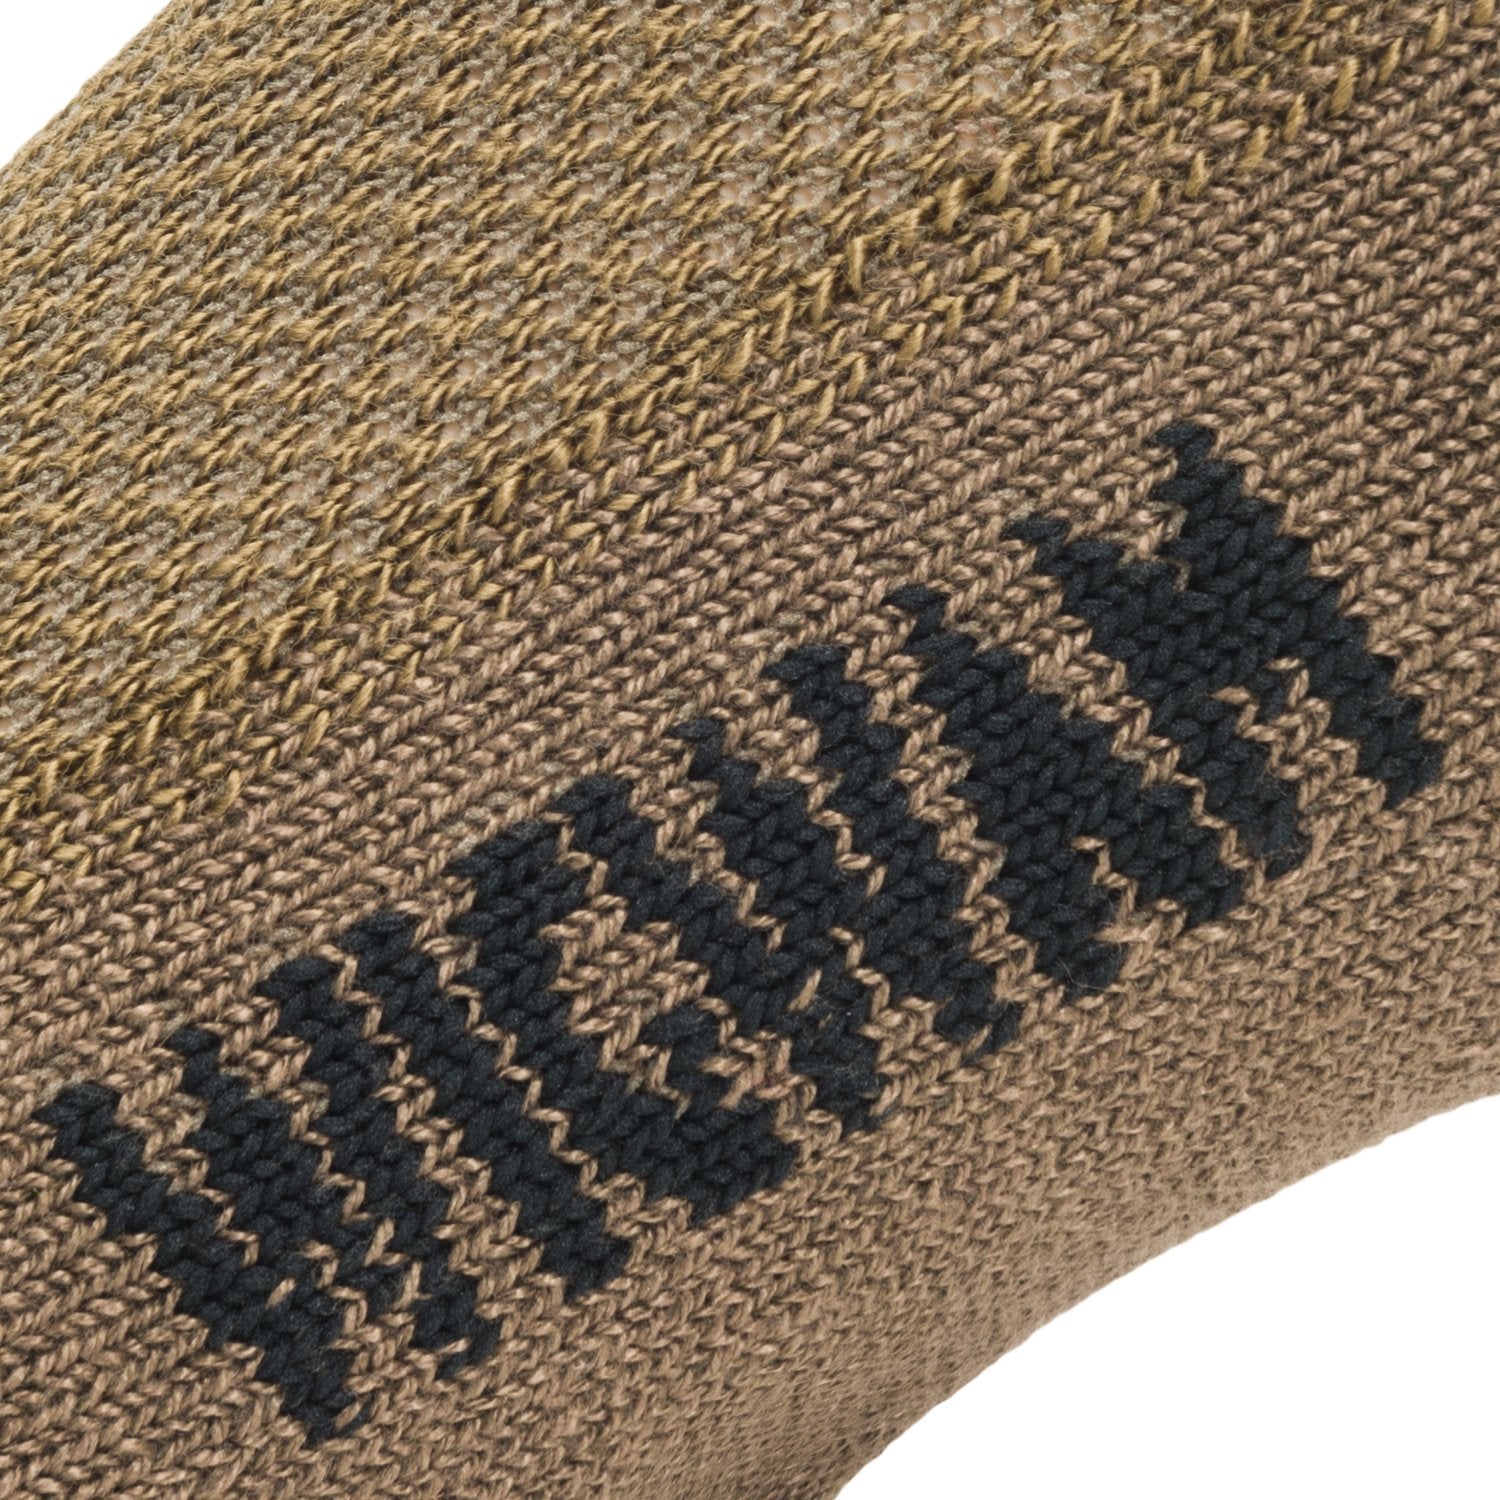 Hot Weather BDU Pro Midweight Crew Sock - Coyote Brown knit-in logo - made in The USA Wigwam Socks